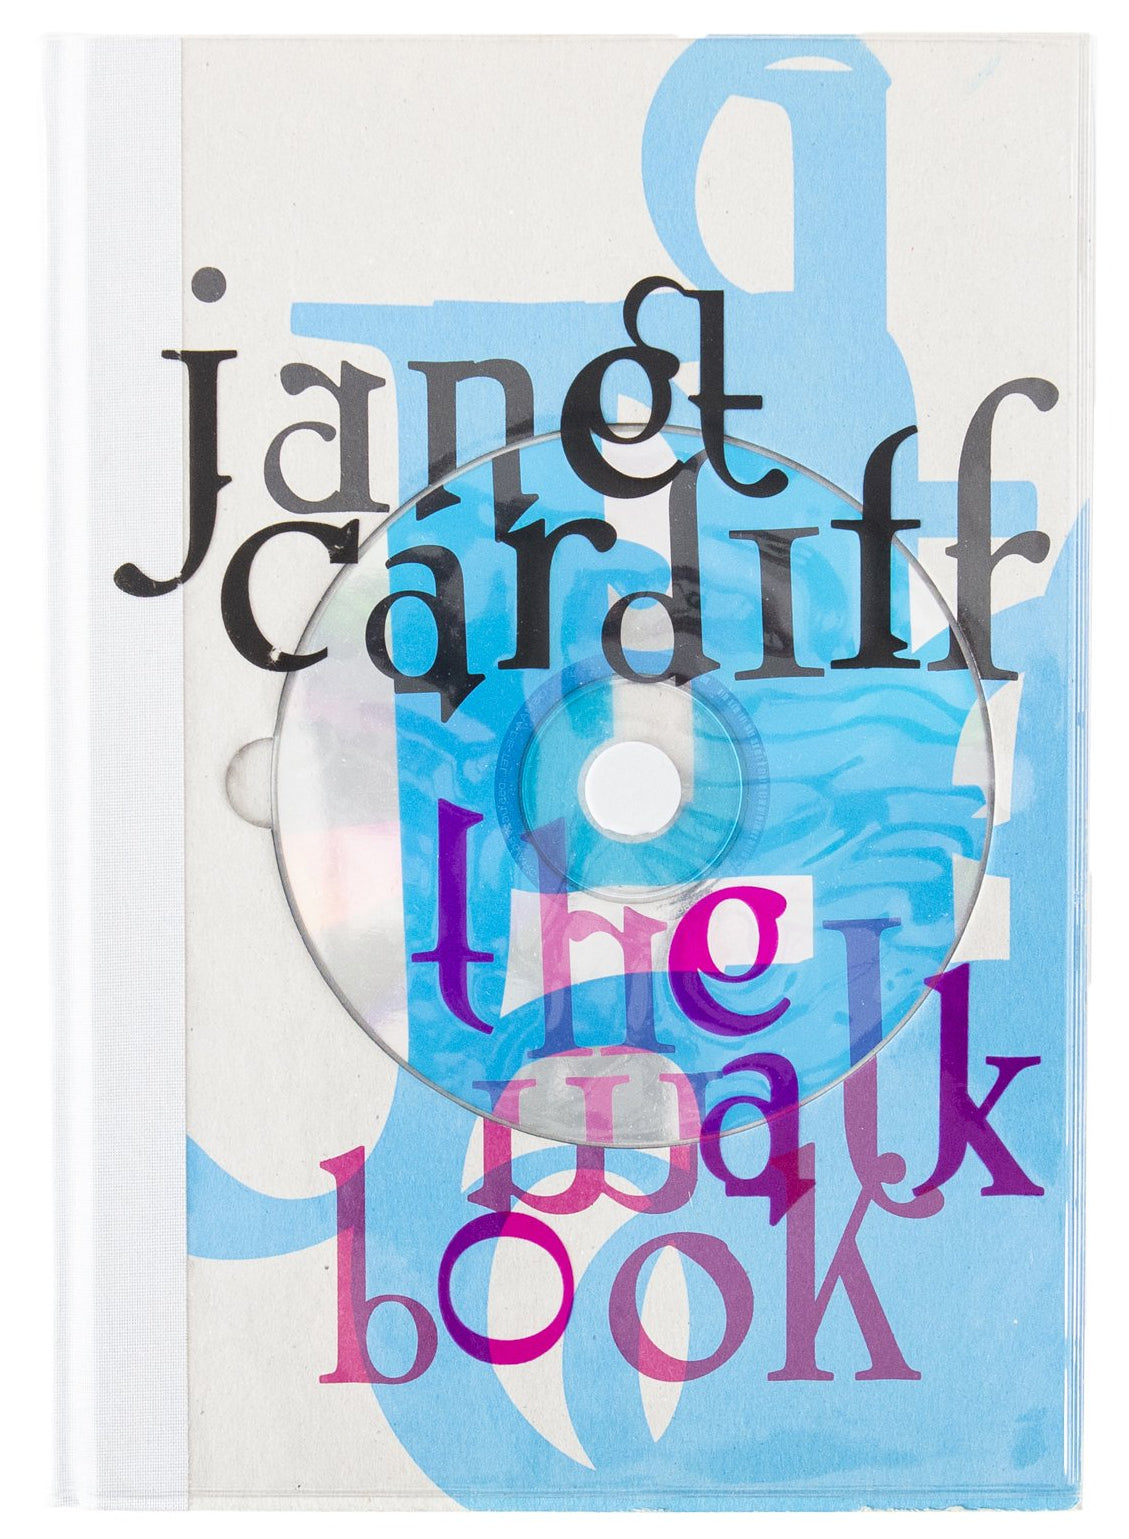 Cover of Janet Cardiff's book 